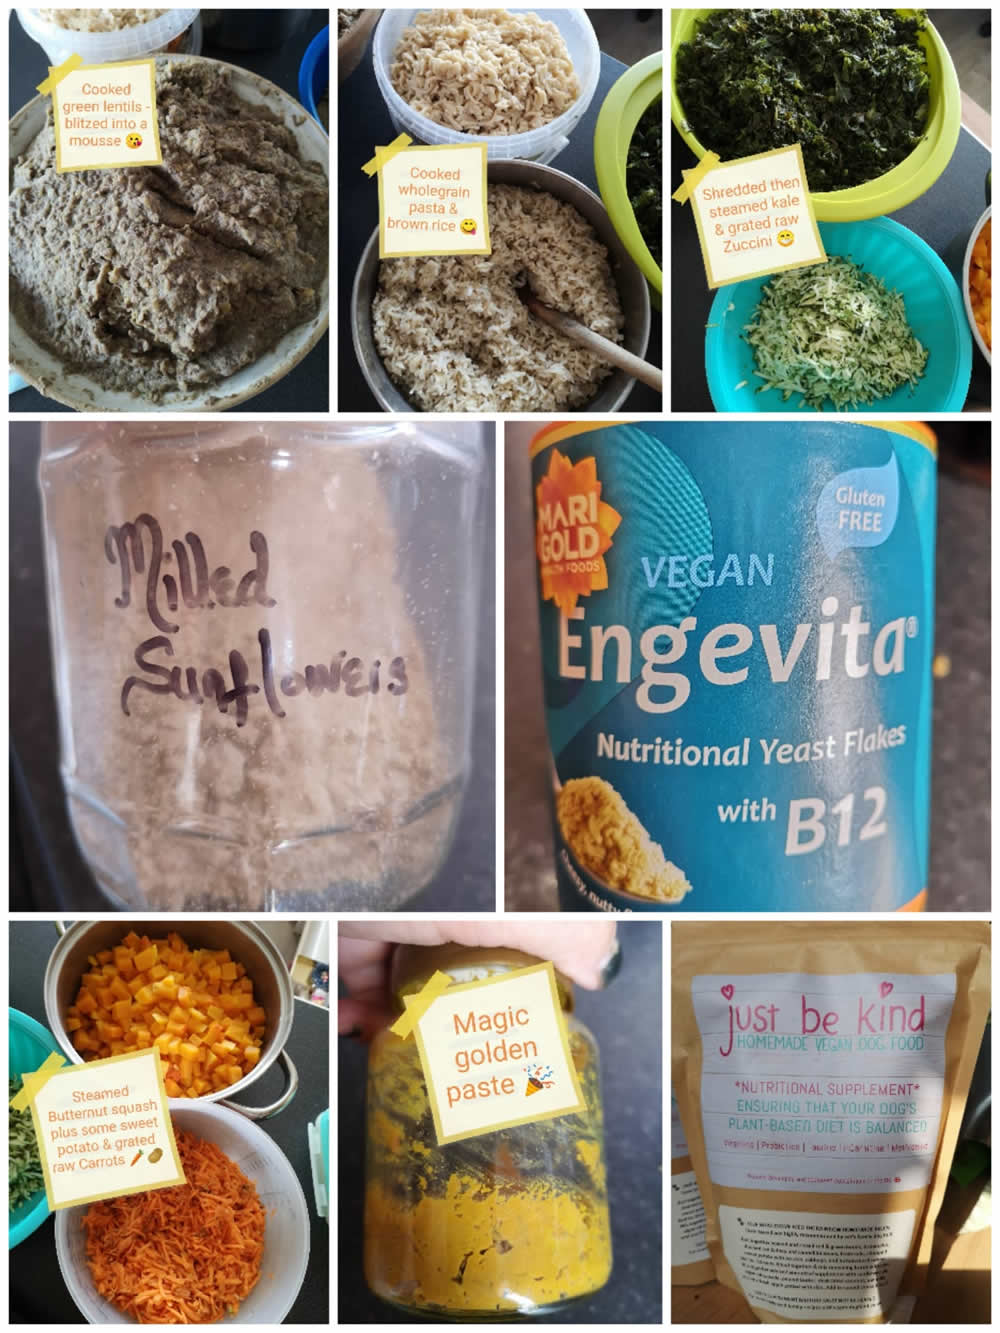 Ingredients used in homemade vegan food for Nahla and Bruce